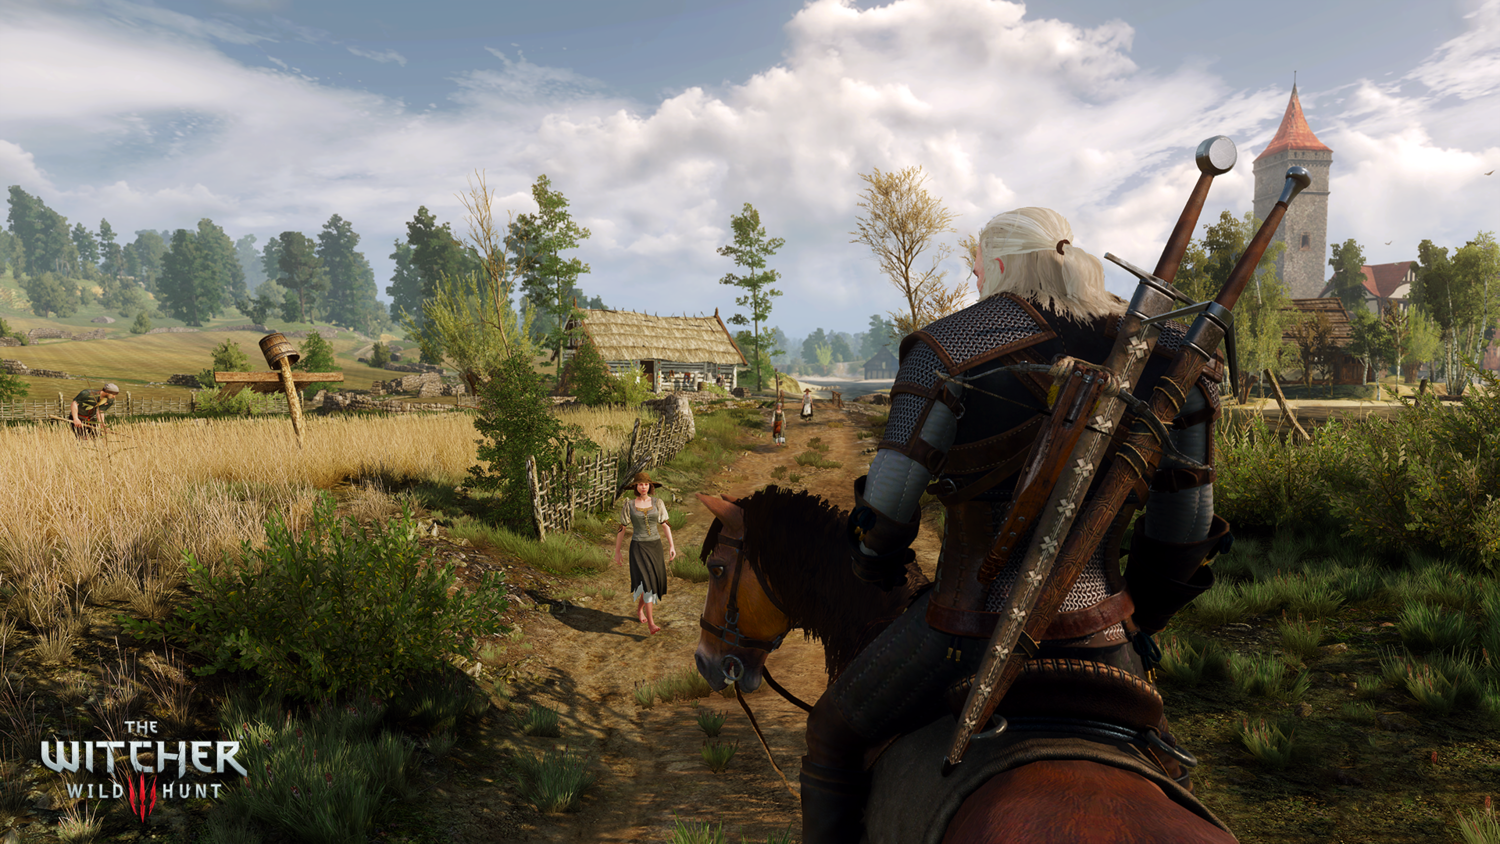 Screenshot for the game The Witcher 3: Wild Hunt + the Witcher 3 HD Reworked Project (mod V. 12.0) (2015) download torrent RePack